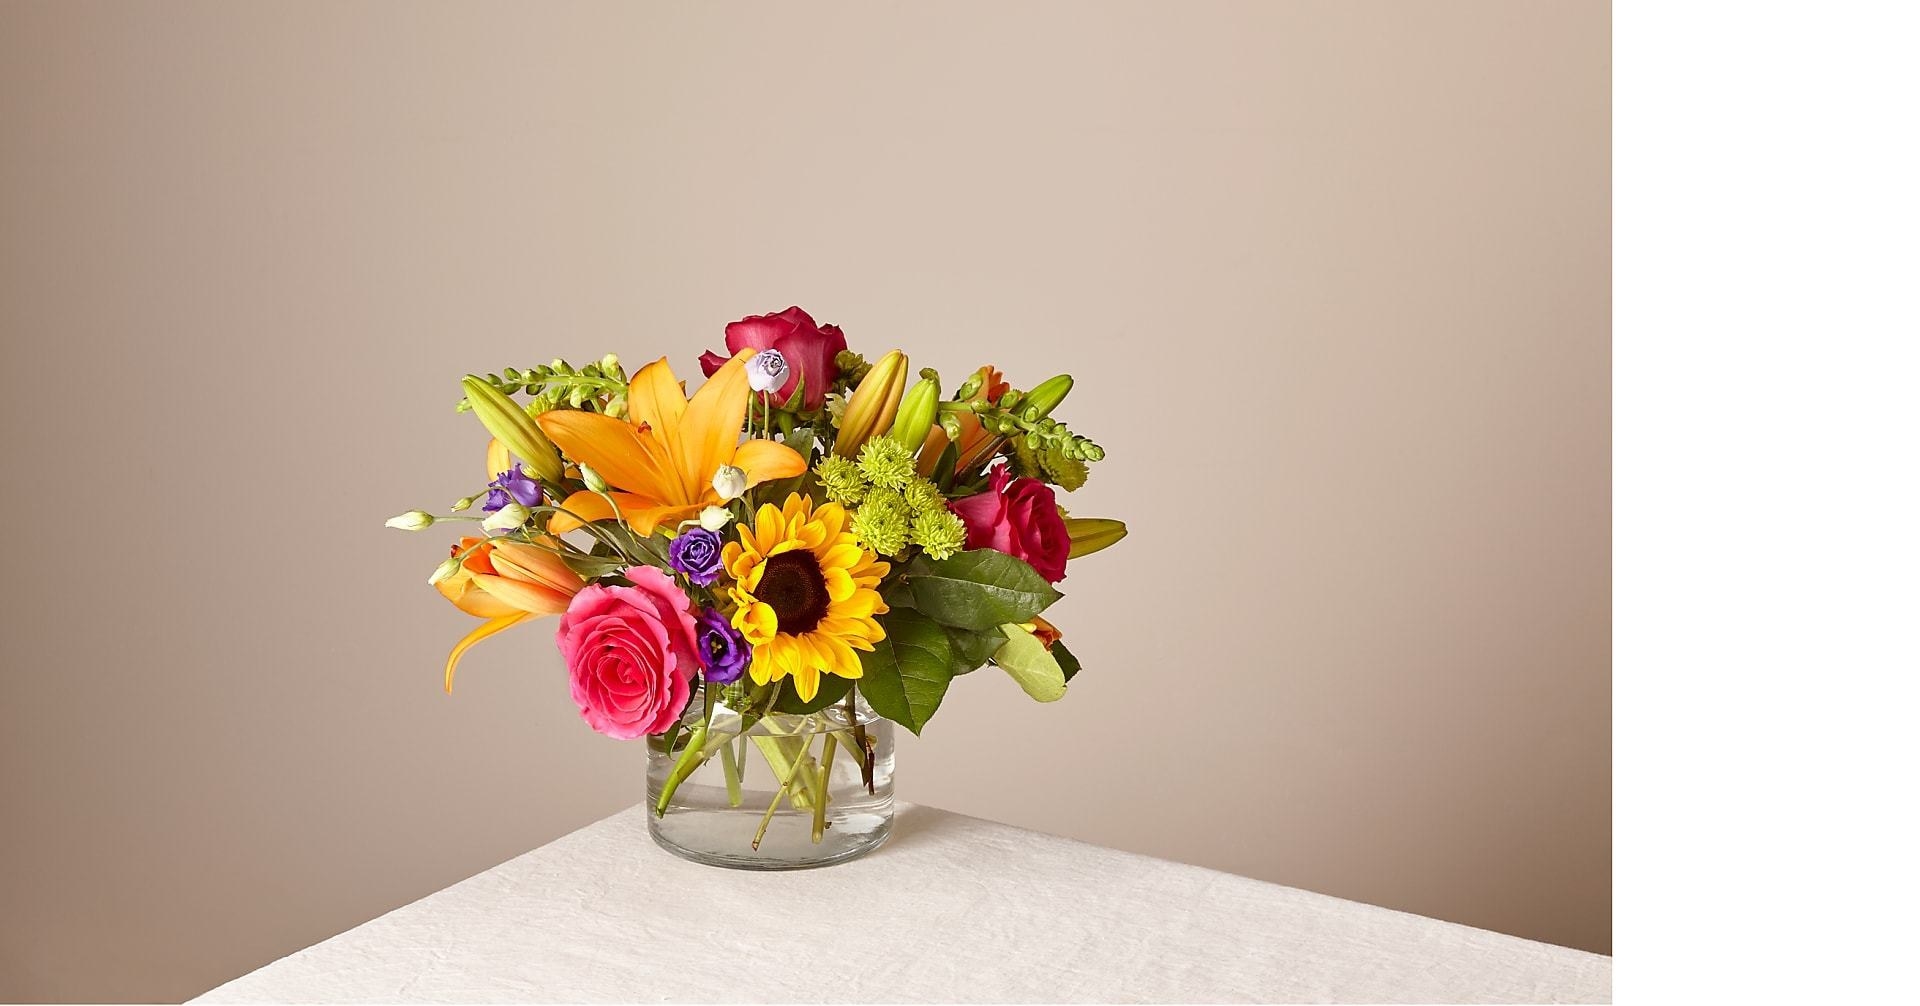  5 Best Same Day Flower Delivery Services